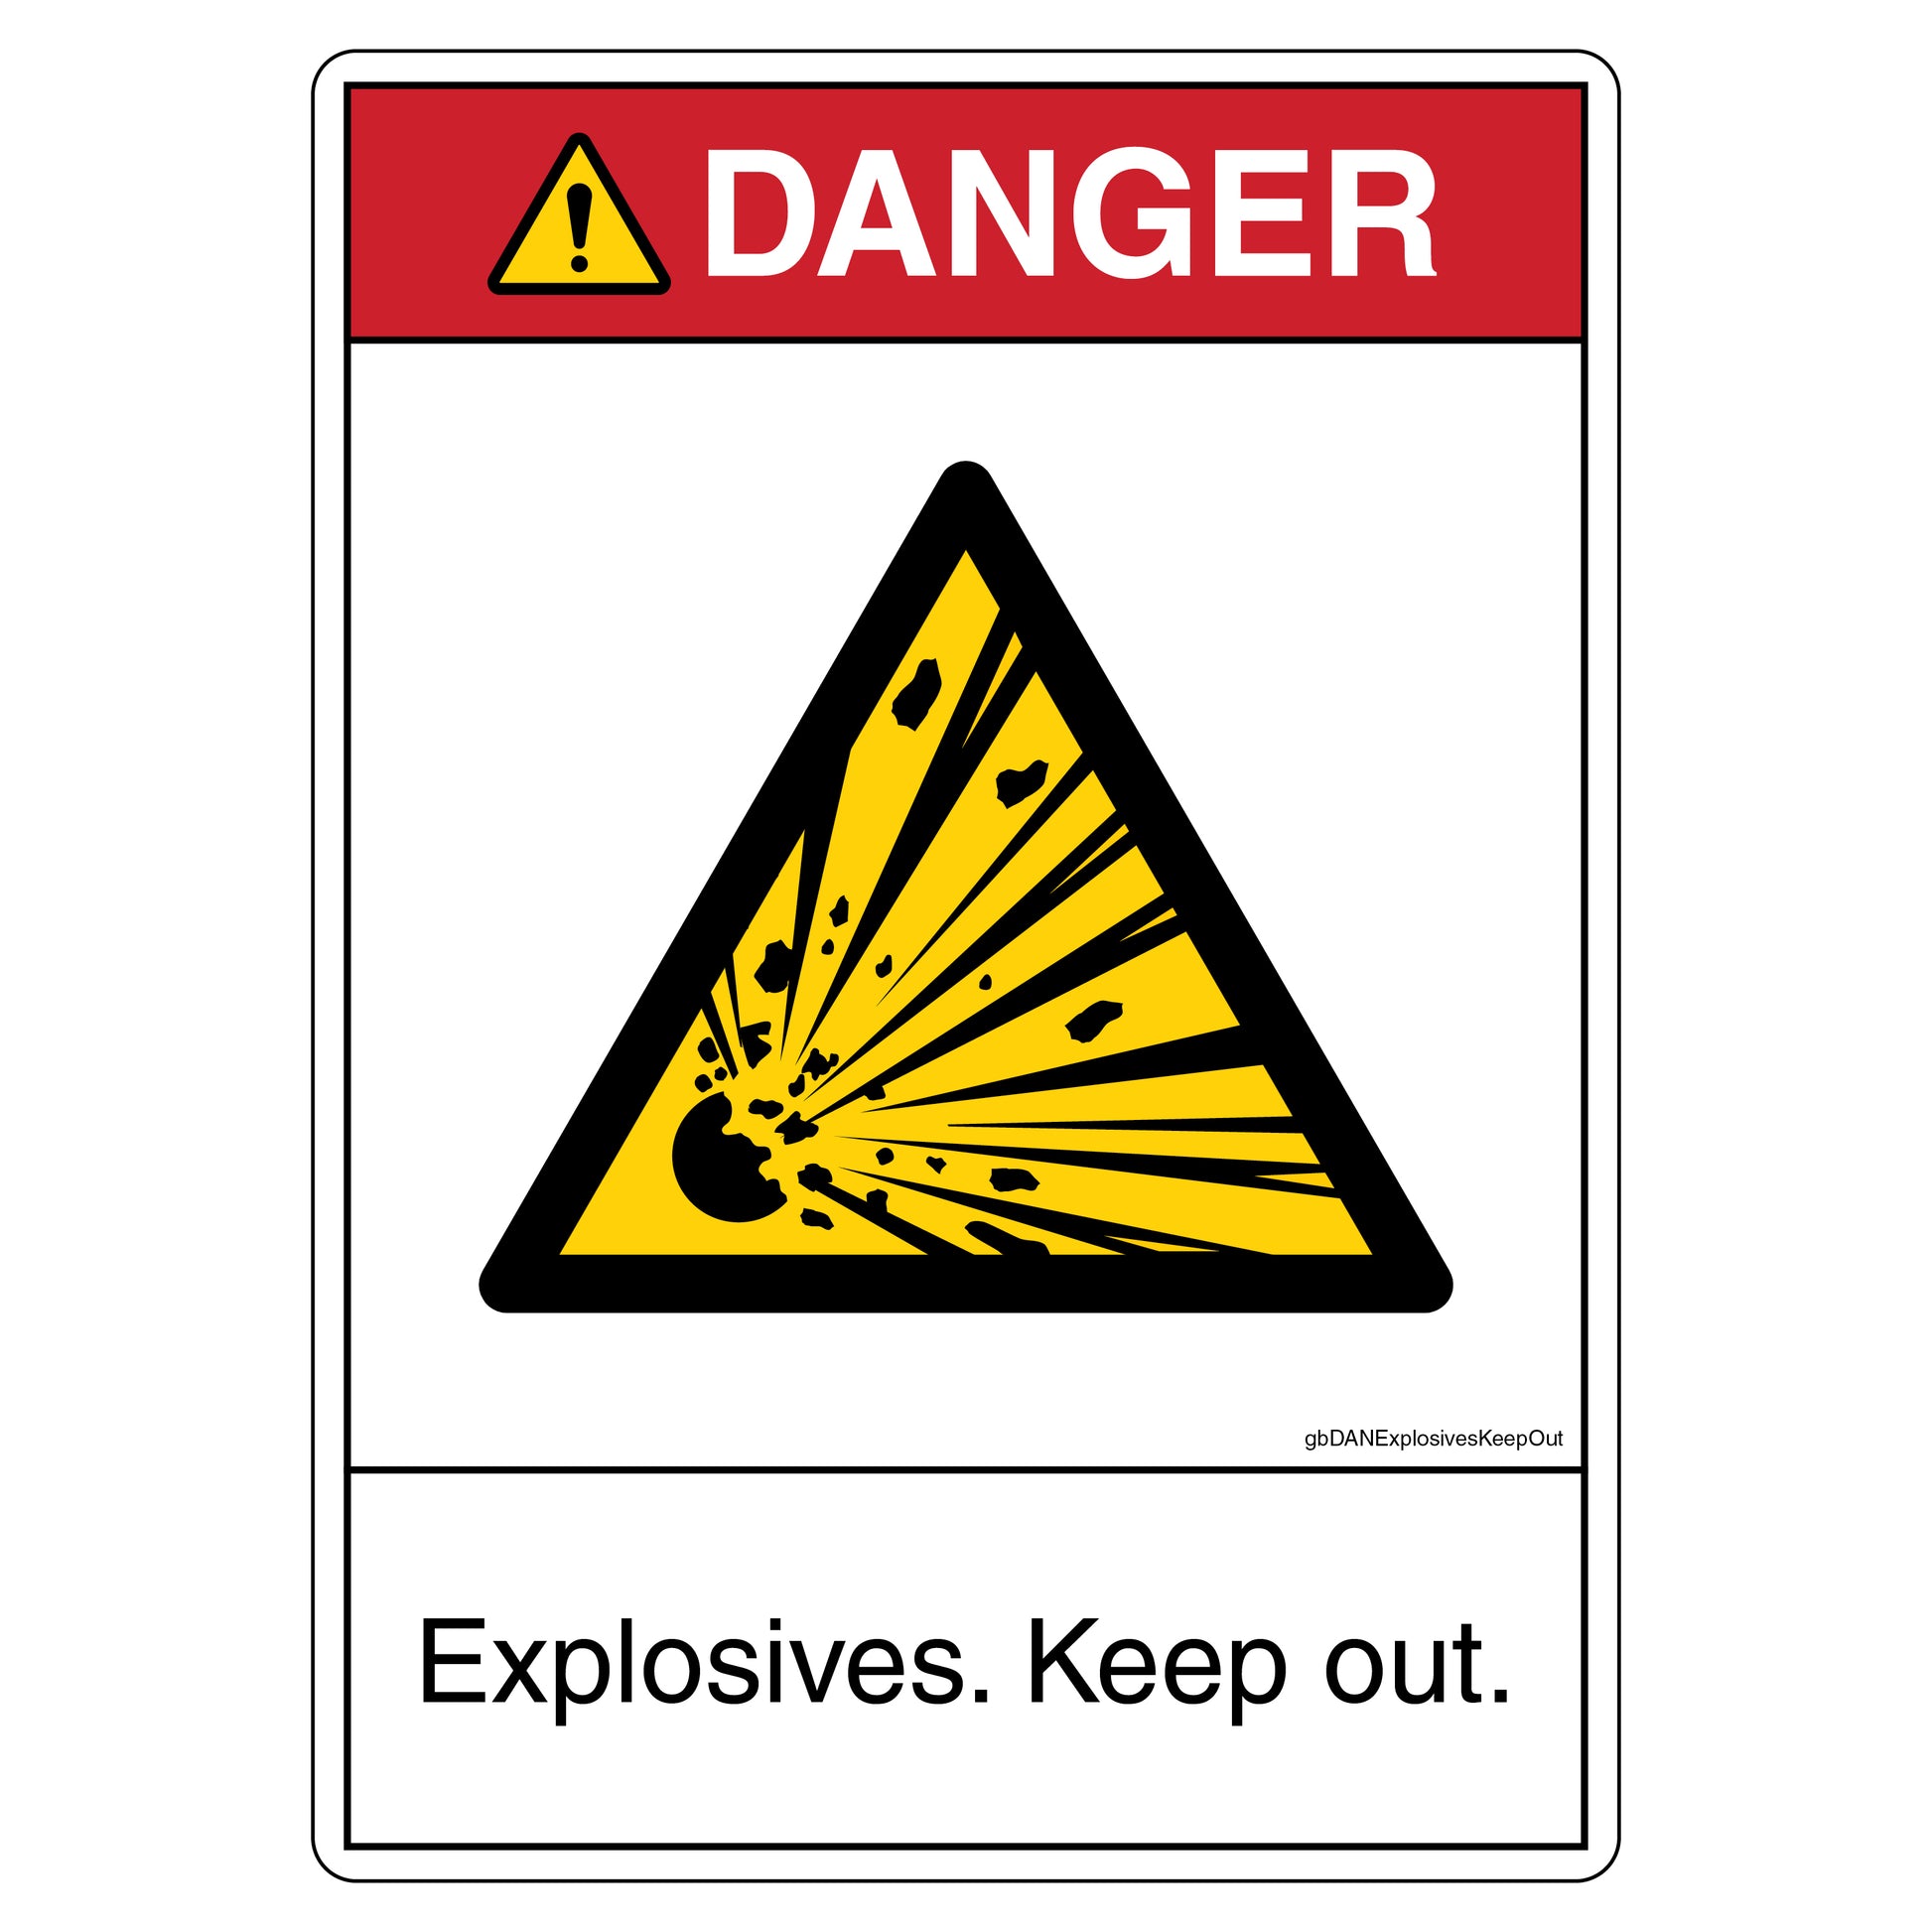 Danger Explosives Keep Out Decal.